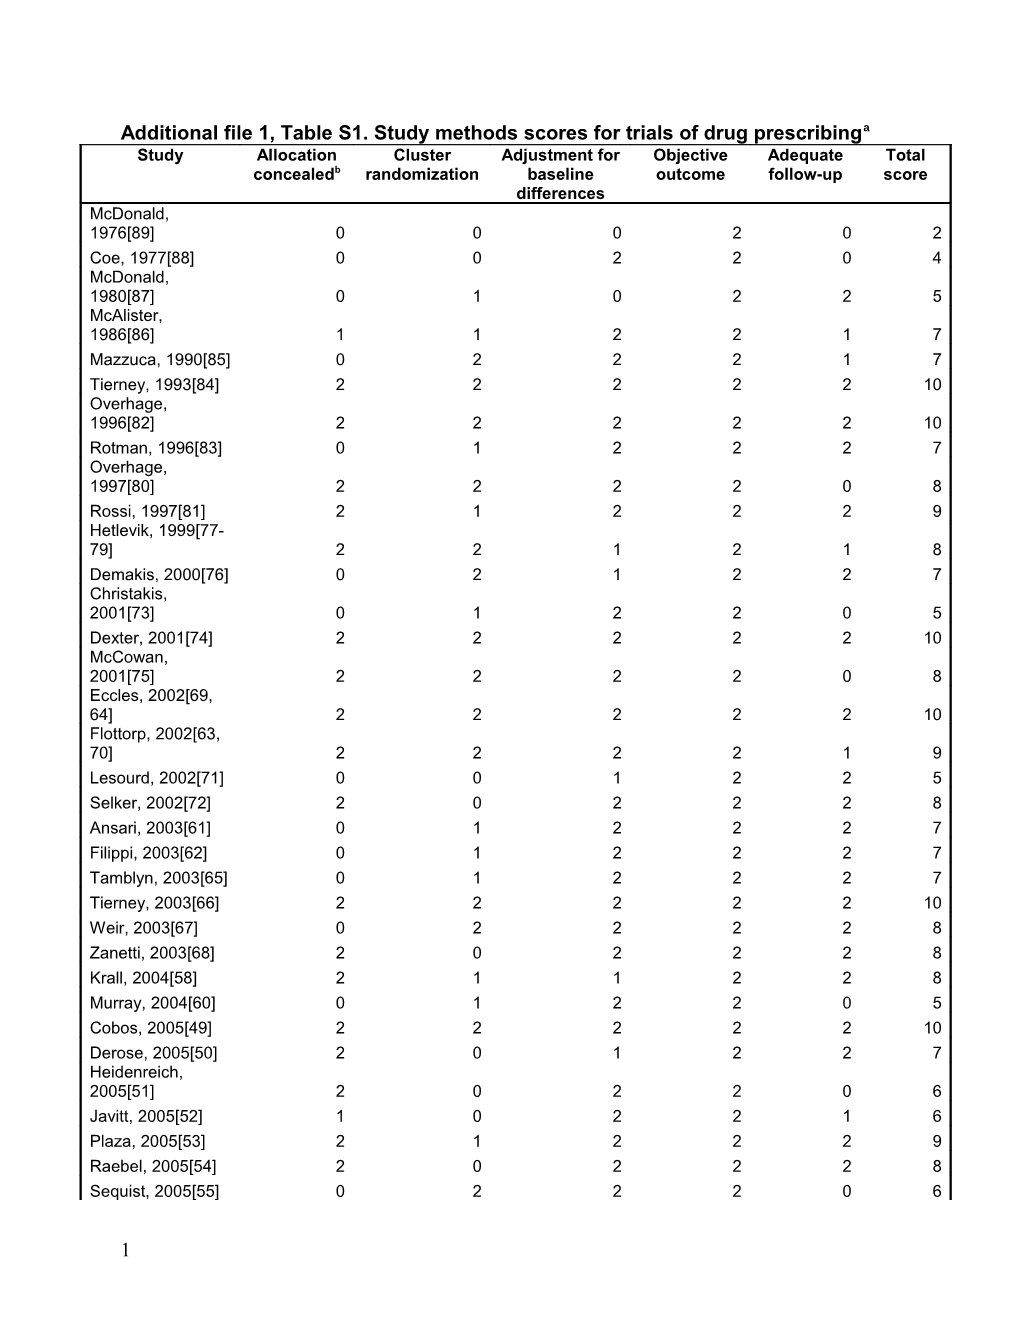 Additional File 1, Table S1. Study Methods Scores for Trials of Drug Prescribinga